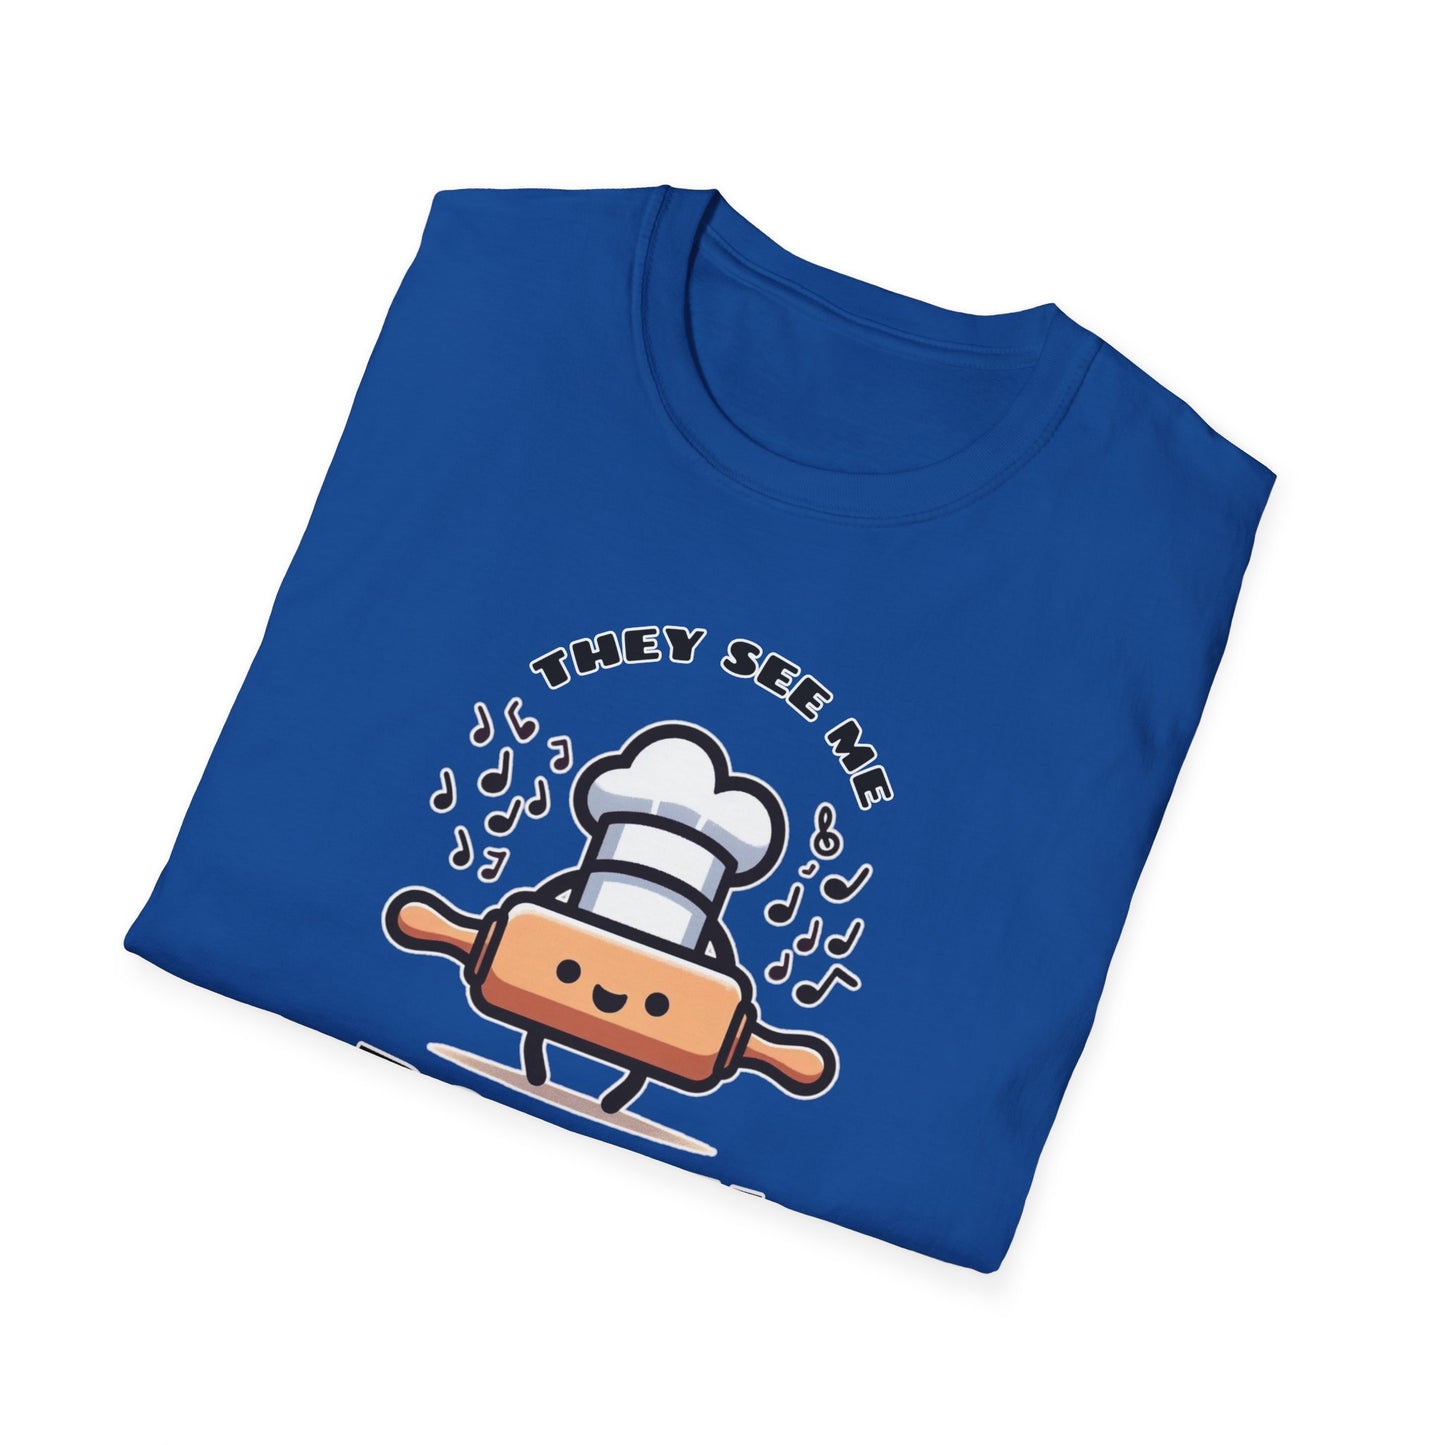 Rolling in Laughter: The Giggle Baker's Weapon of Choice Tee They See Me Rollin Tee